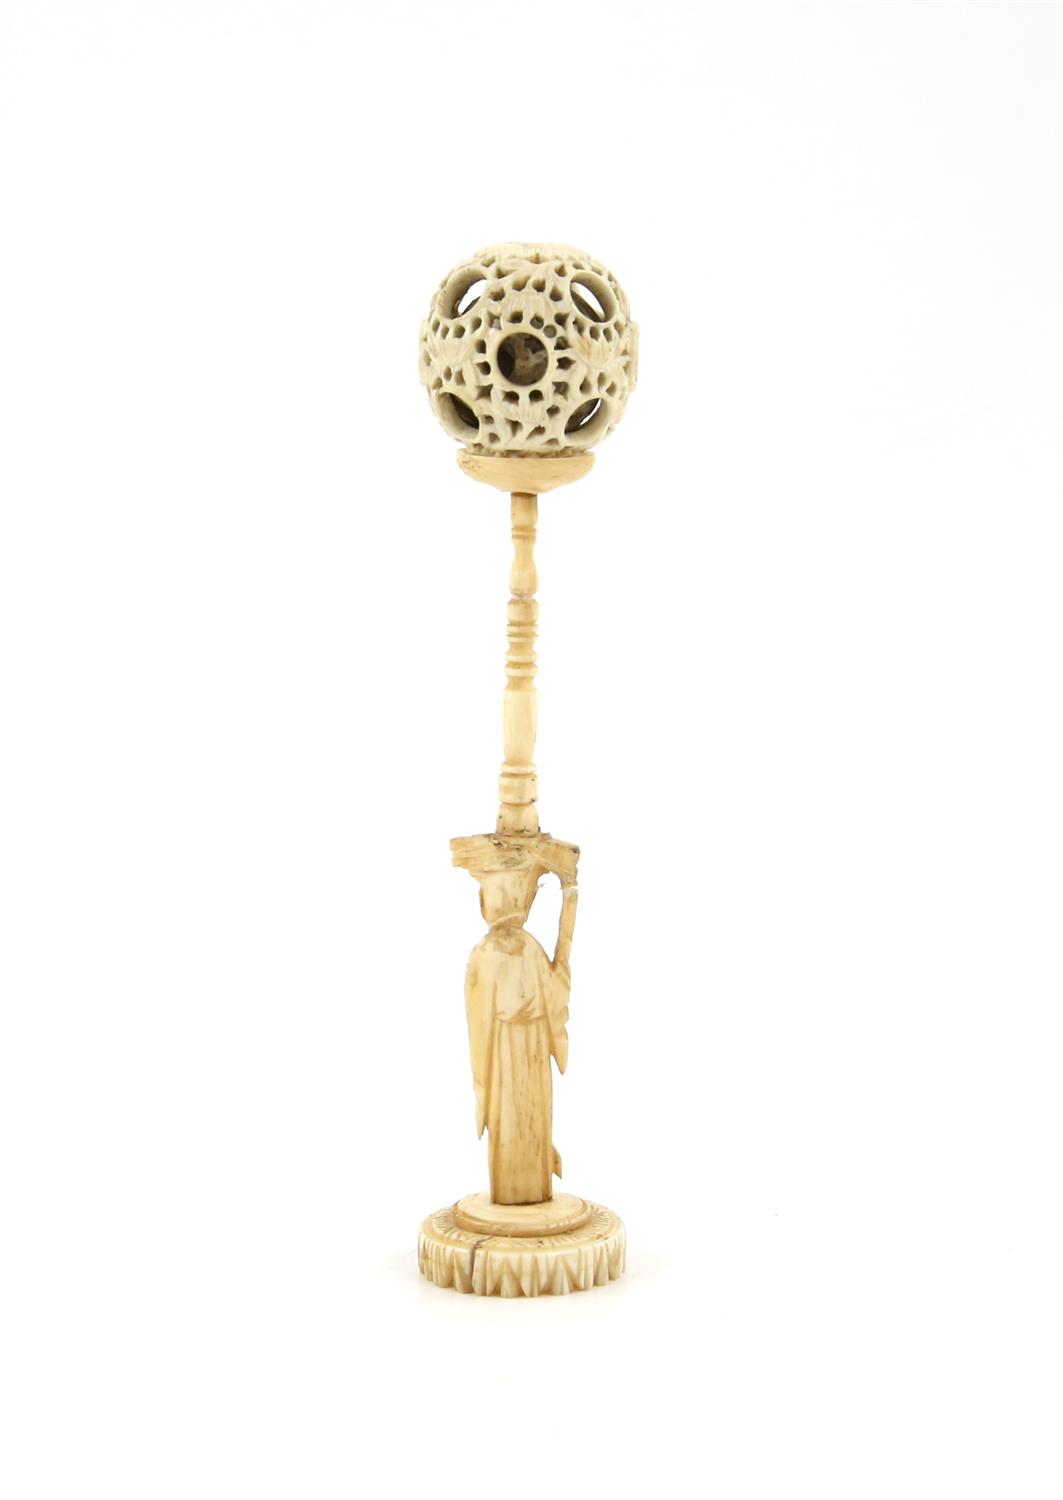 A Chinese Devil's work ball on stand  Carved bone with a puzzle ball and a stand with  a lady : 14. - Image 3 of 7